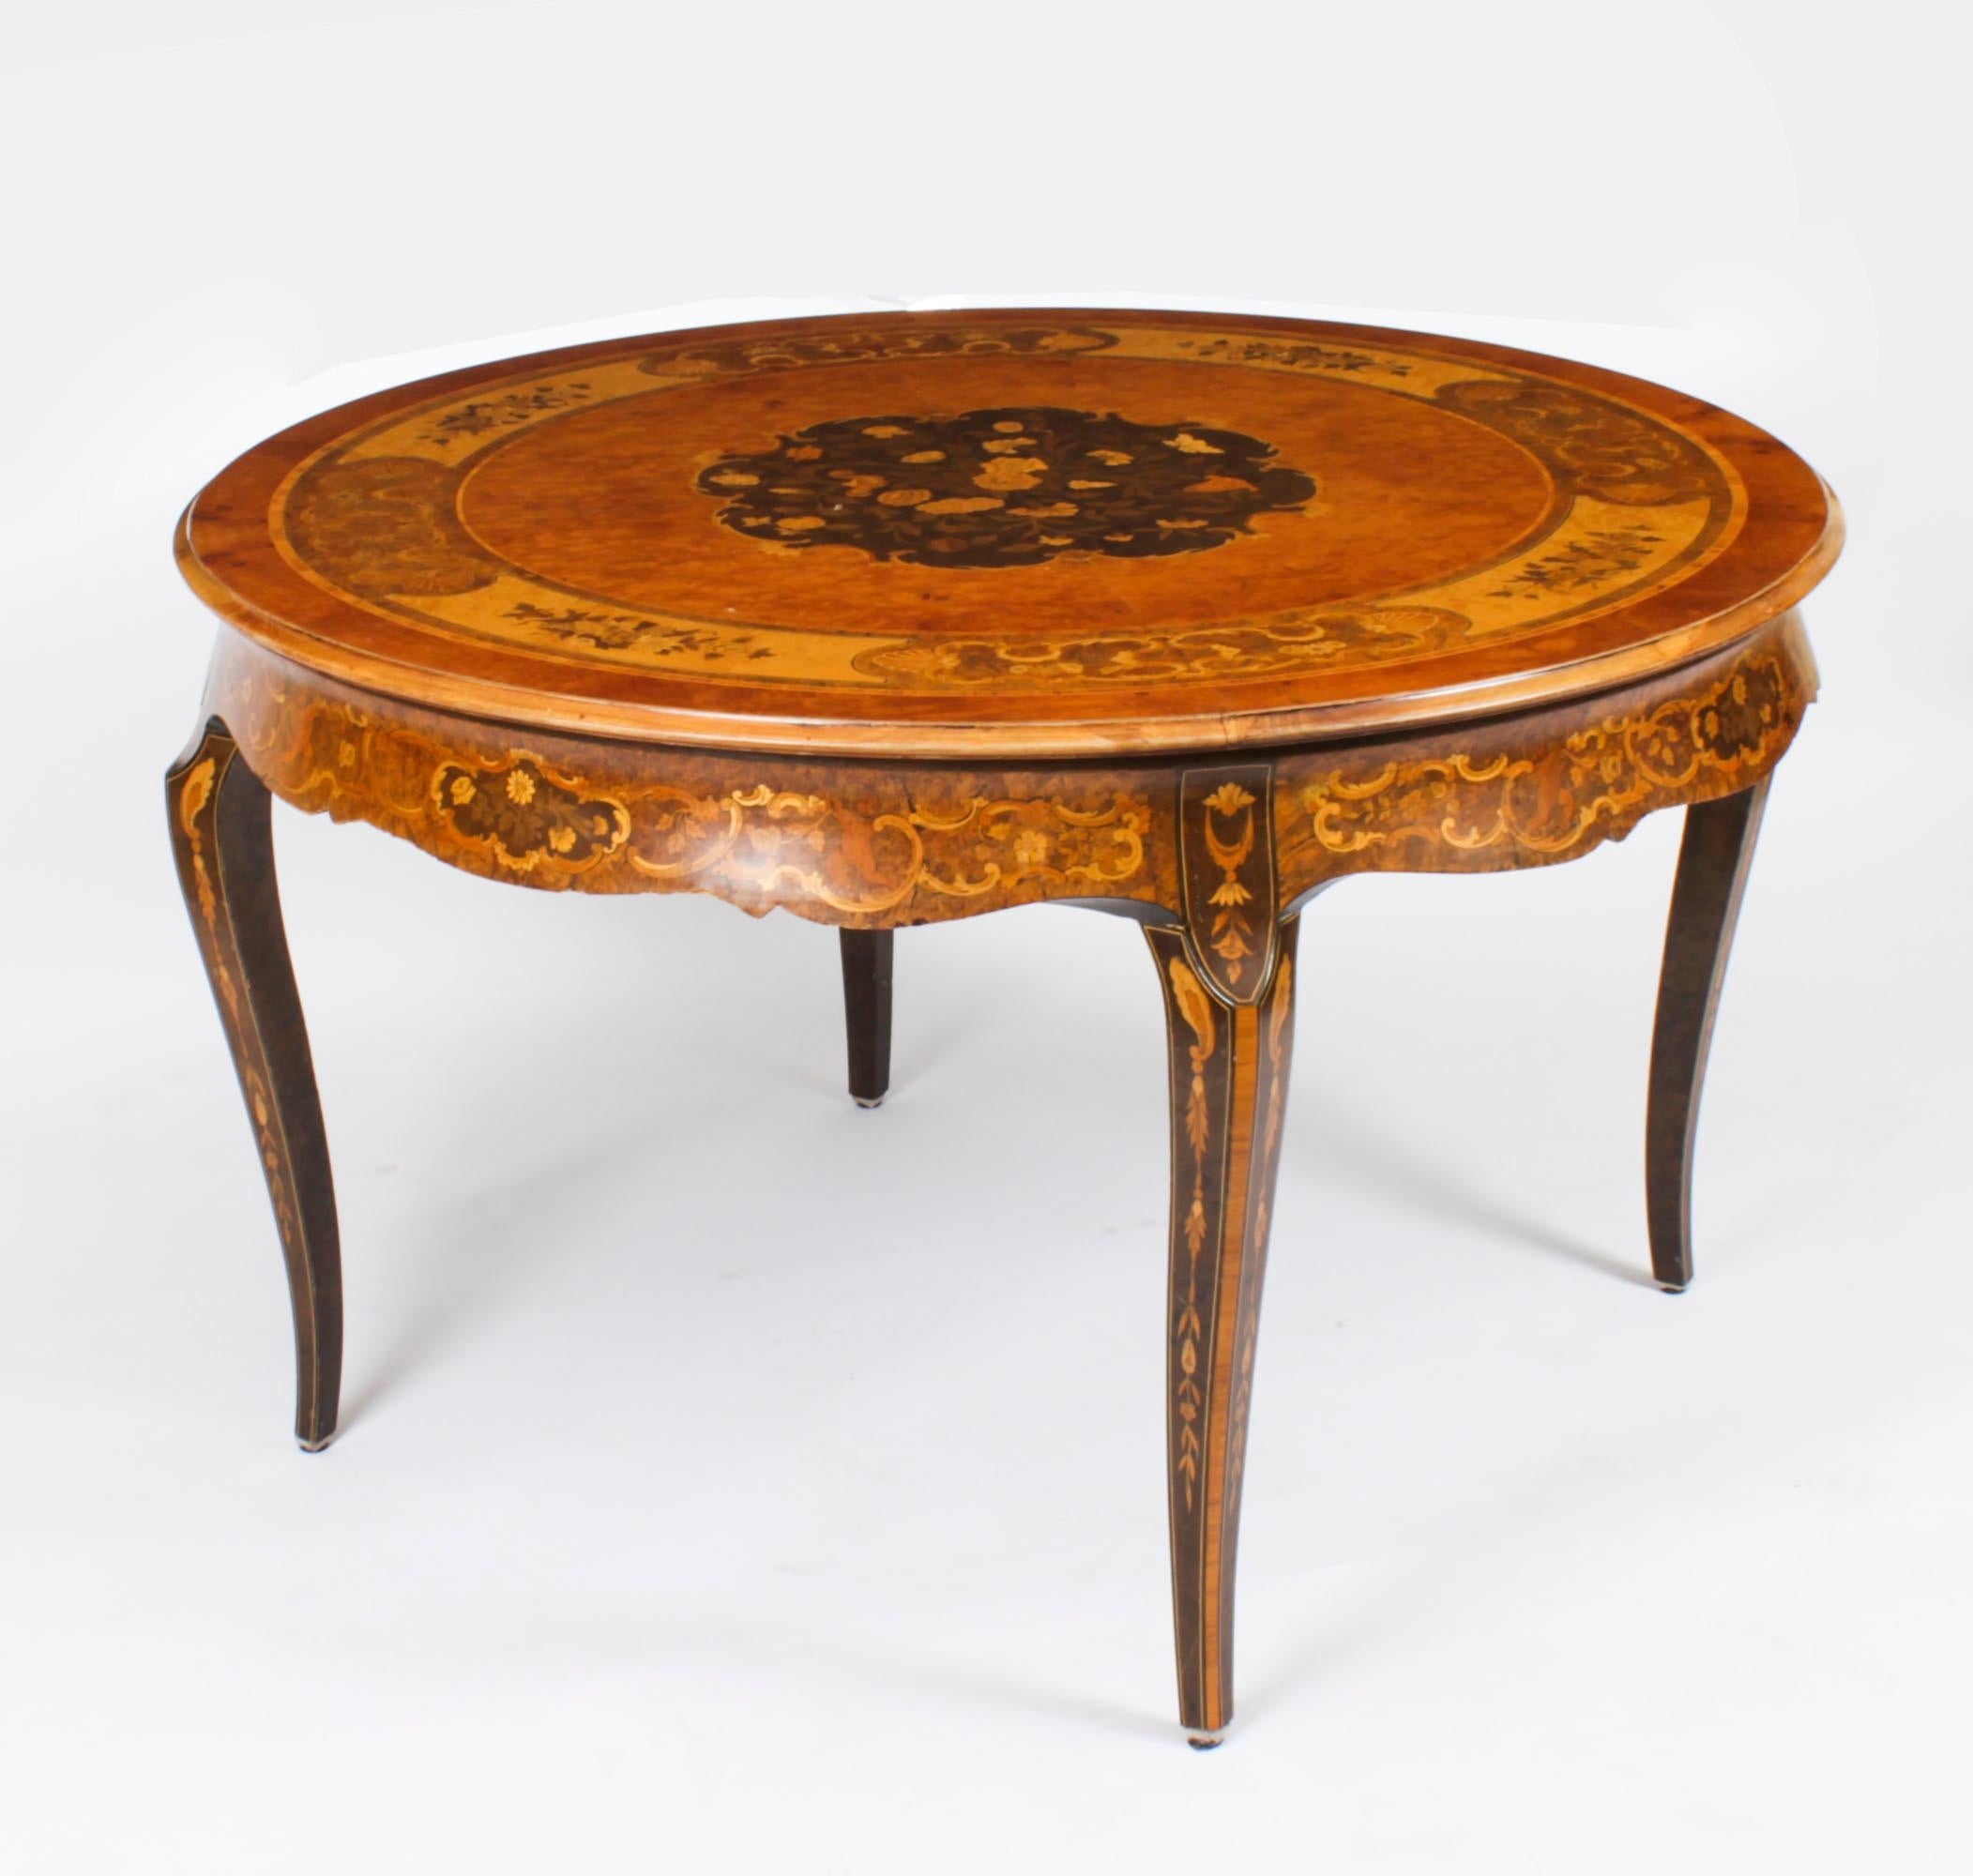 Antique Burr Walnut Marquetry Centre / Dining Table, Early 20th Century For Sale 6